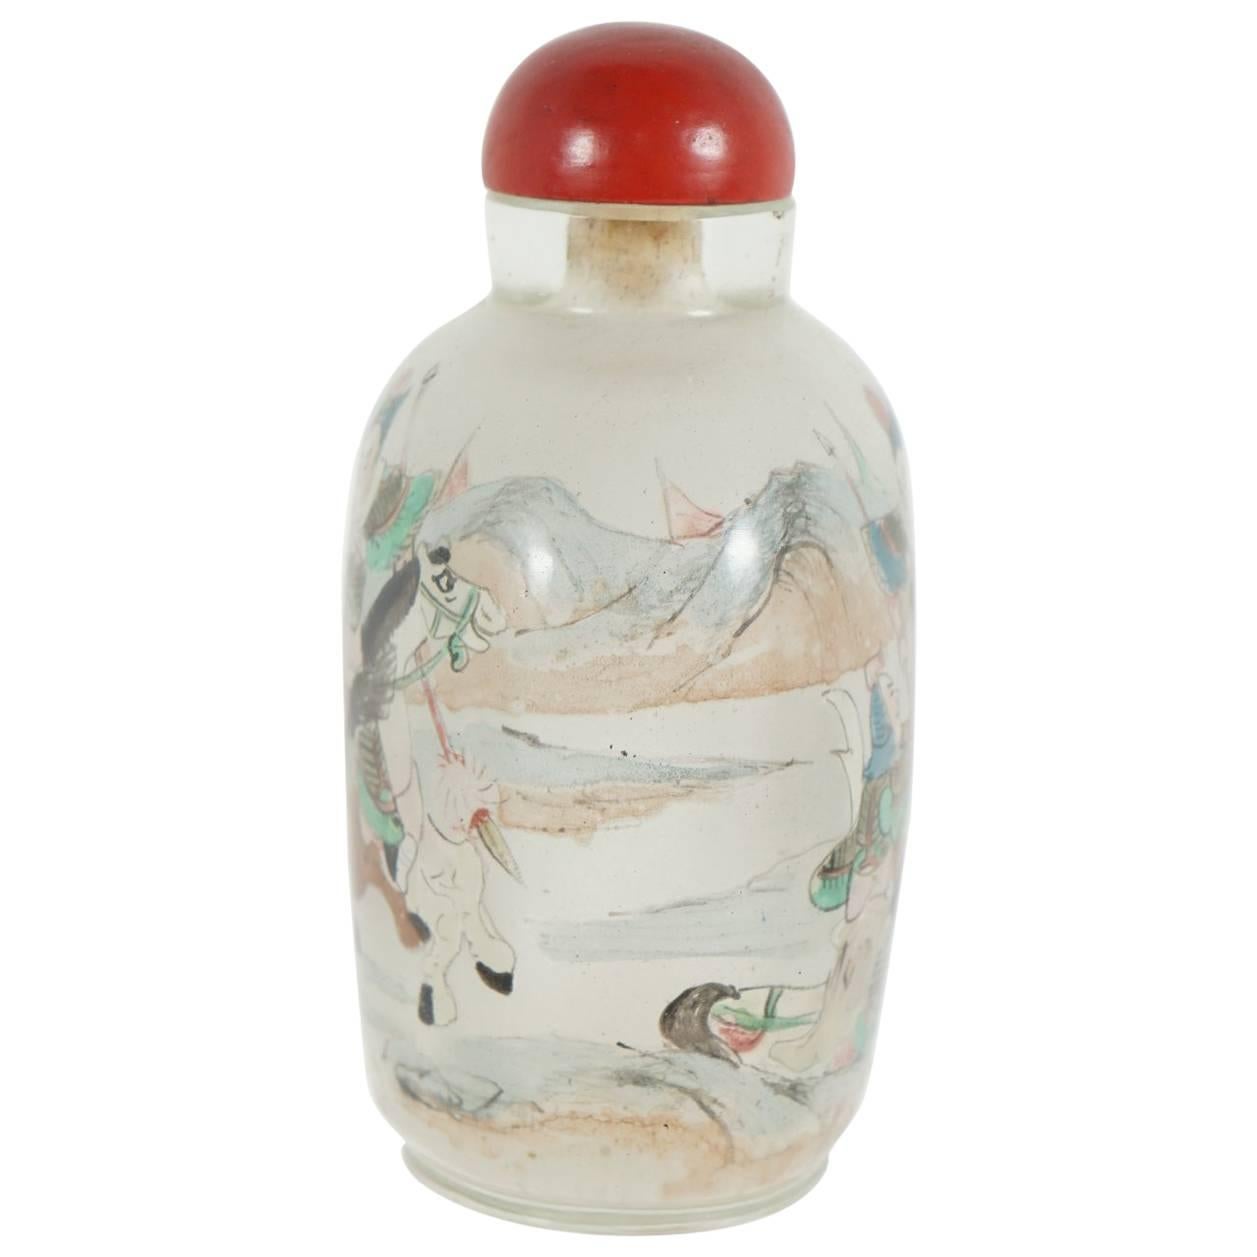 From the Estate of C. Z. Guest. This snuff bottle made in the last century is a fine decorative collectible from the estate of one of America's premier social lights of the 1950s through the 1980s. Her New York, Connecticut and Palm Beach homes have